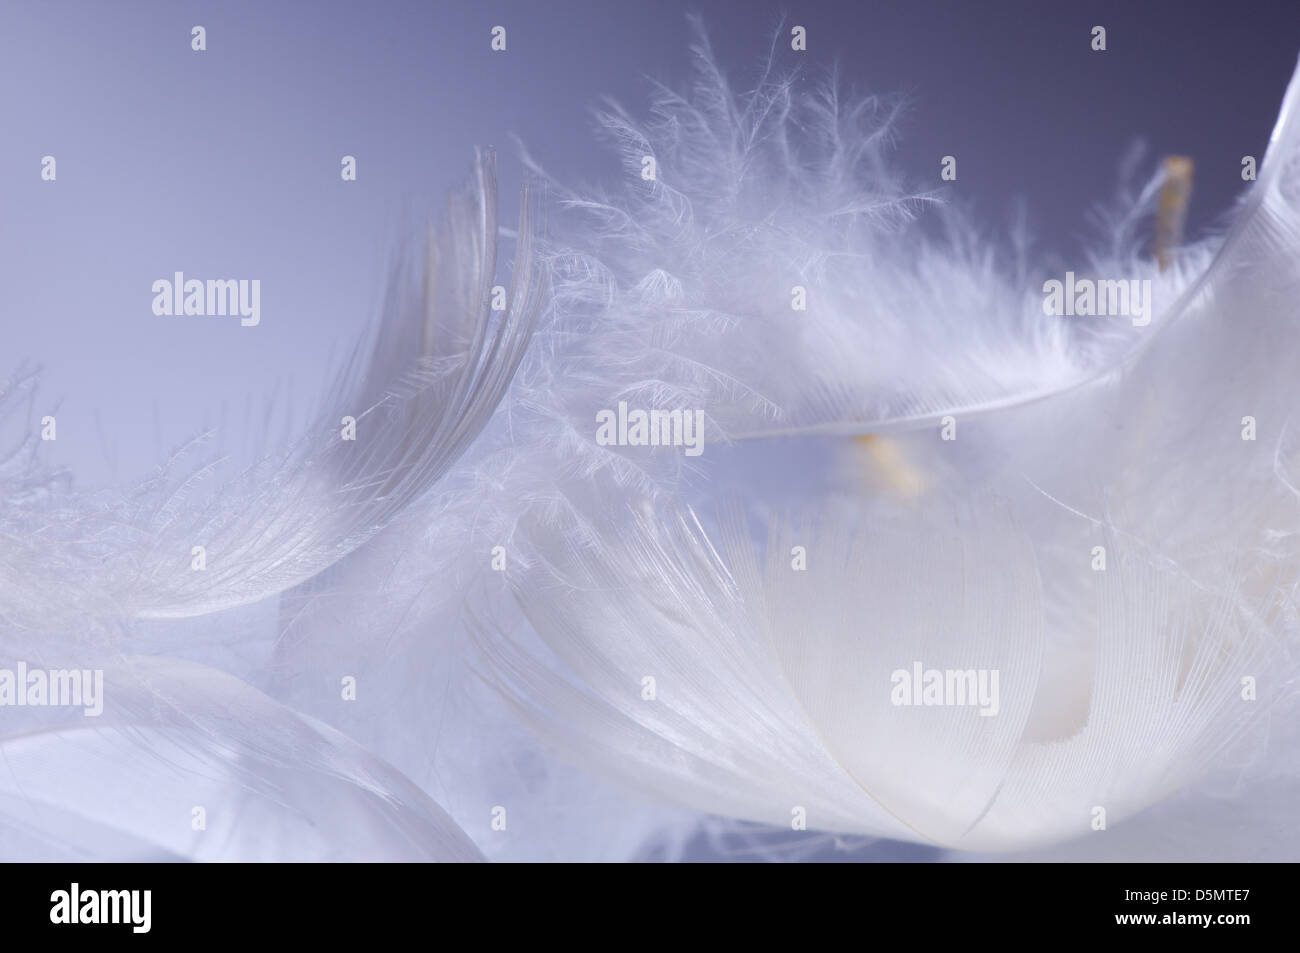 Detail of fluffy white feathers lying Stock Photo